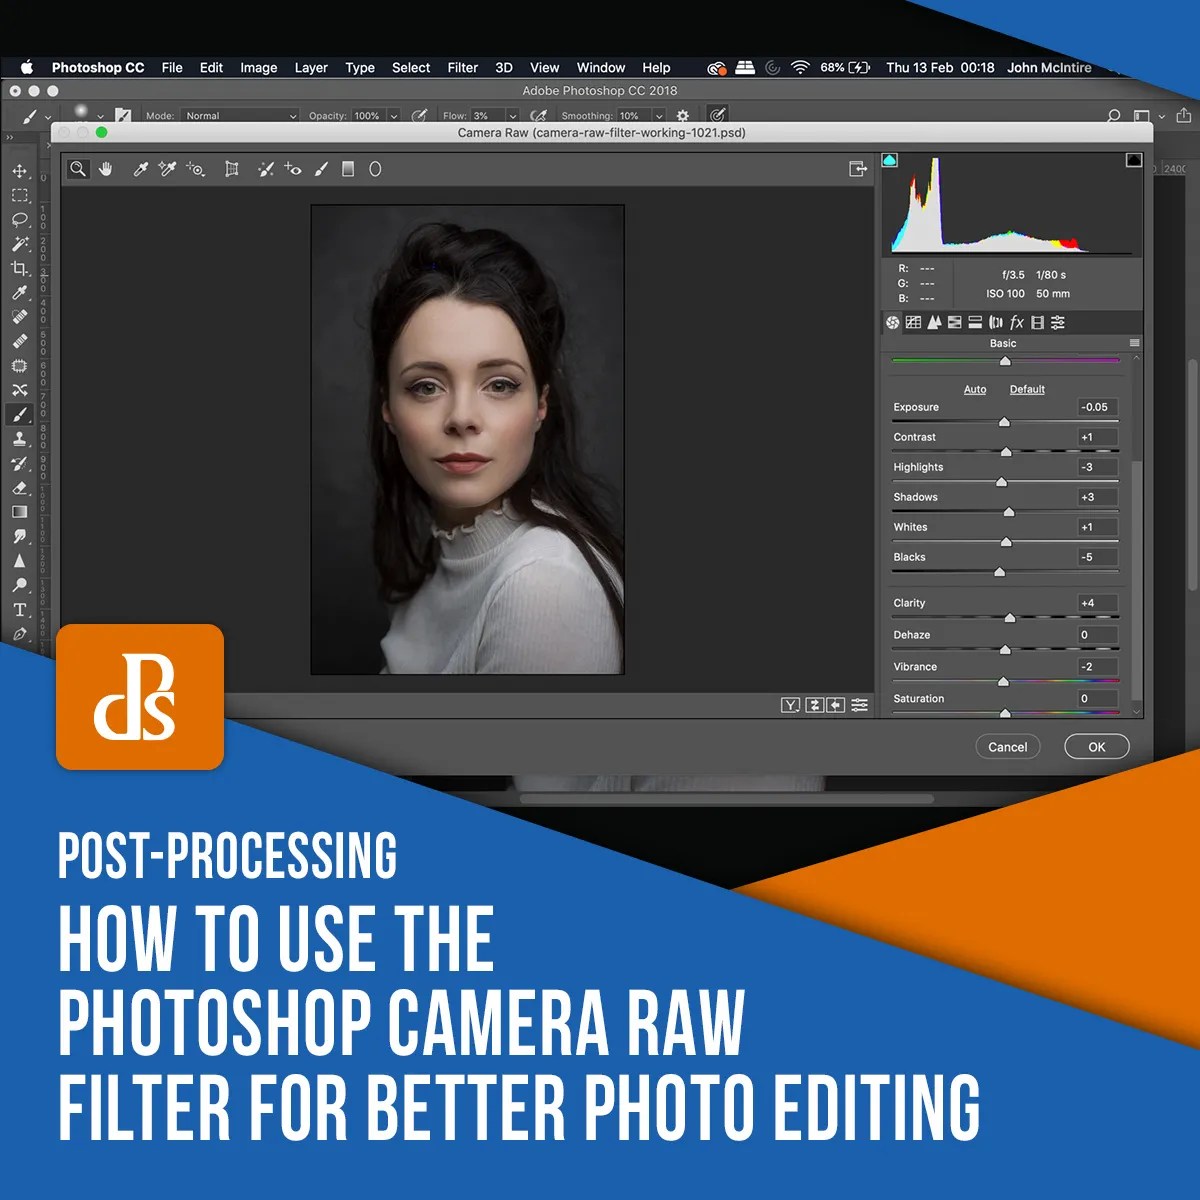 How to Use the Photoshop Camera Raw Filter for Better Photo Editing